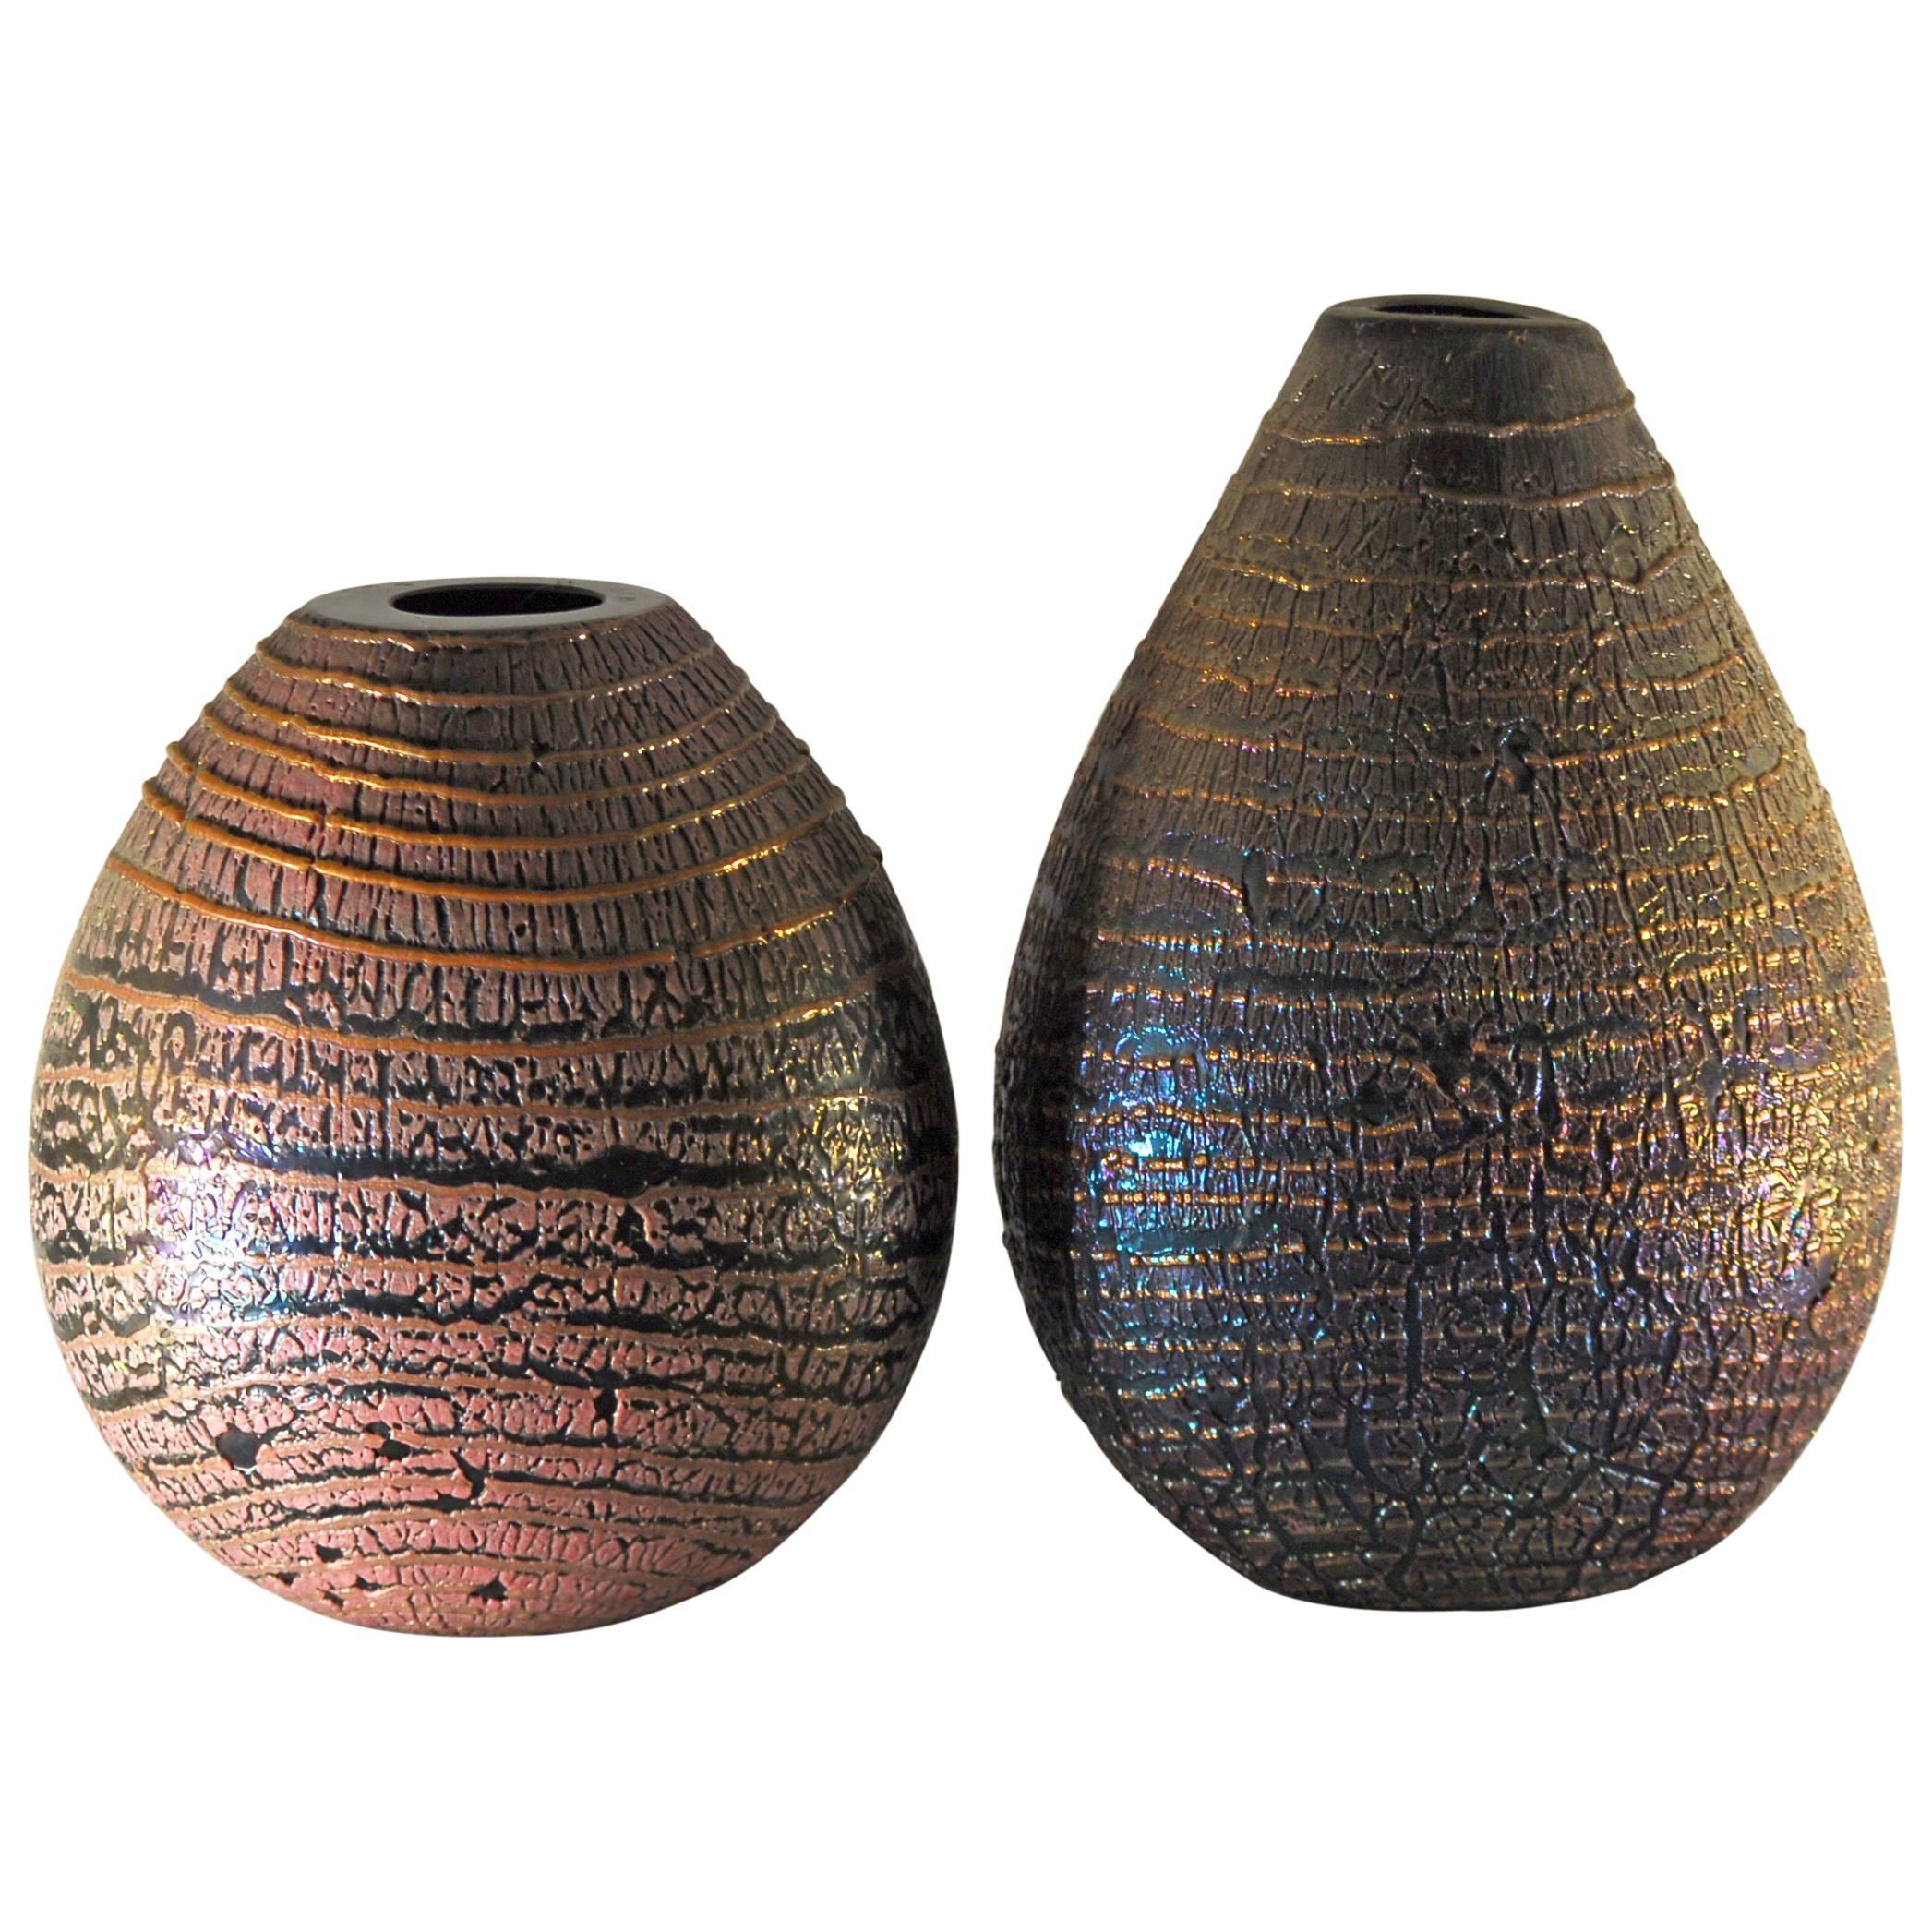 Pair of Crackled Black Iridescent Vases with Avventurina Stripe by Sergio Rossi For Sale